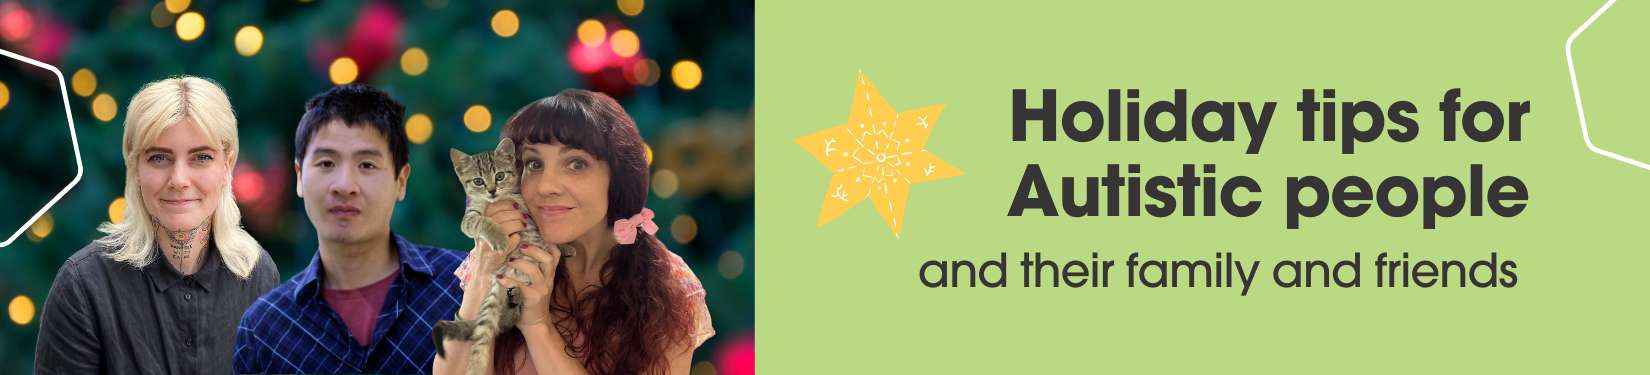 Holiday tips for Autistic people and their family and friends